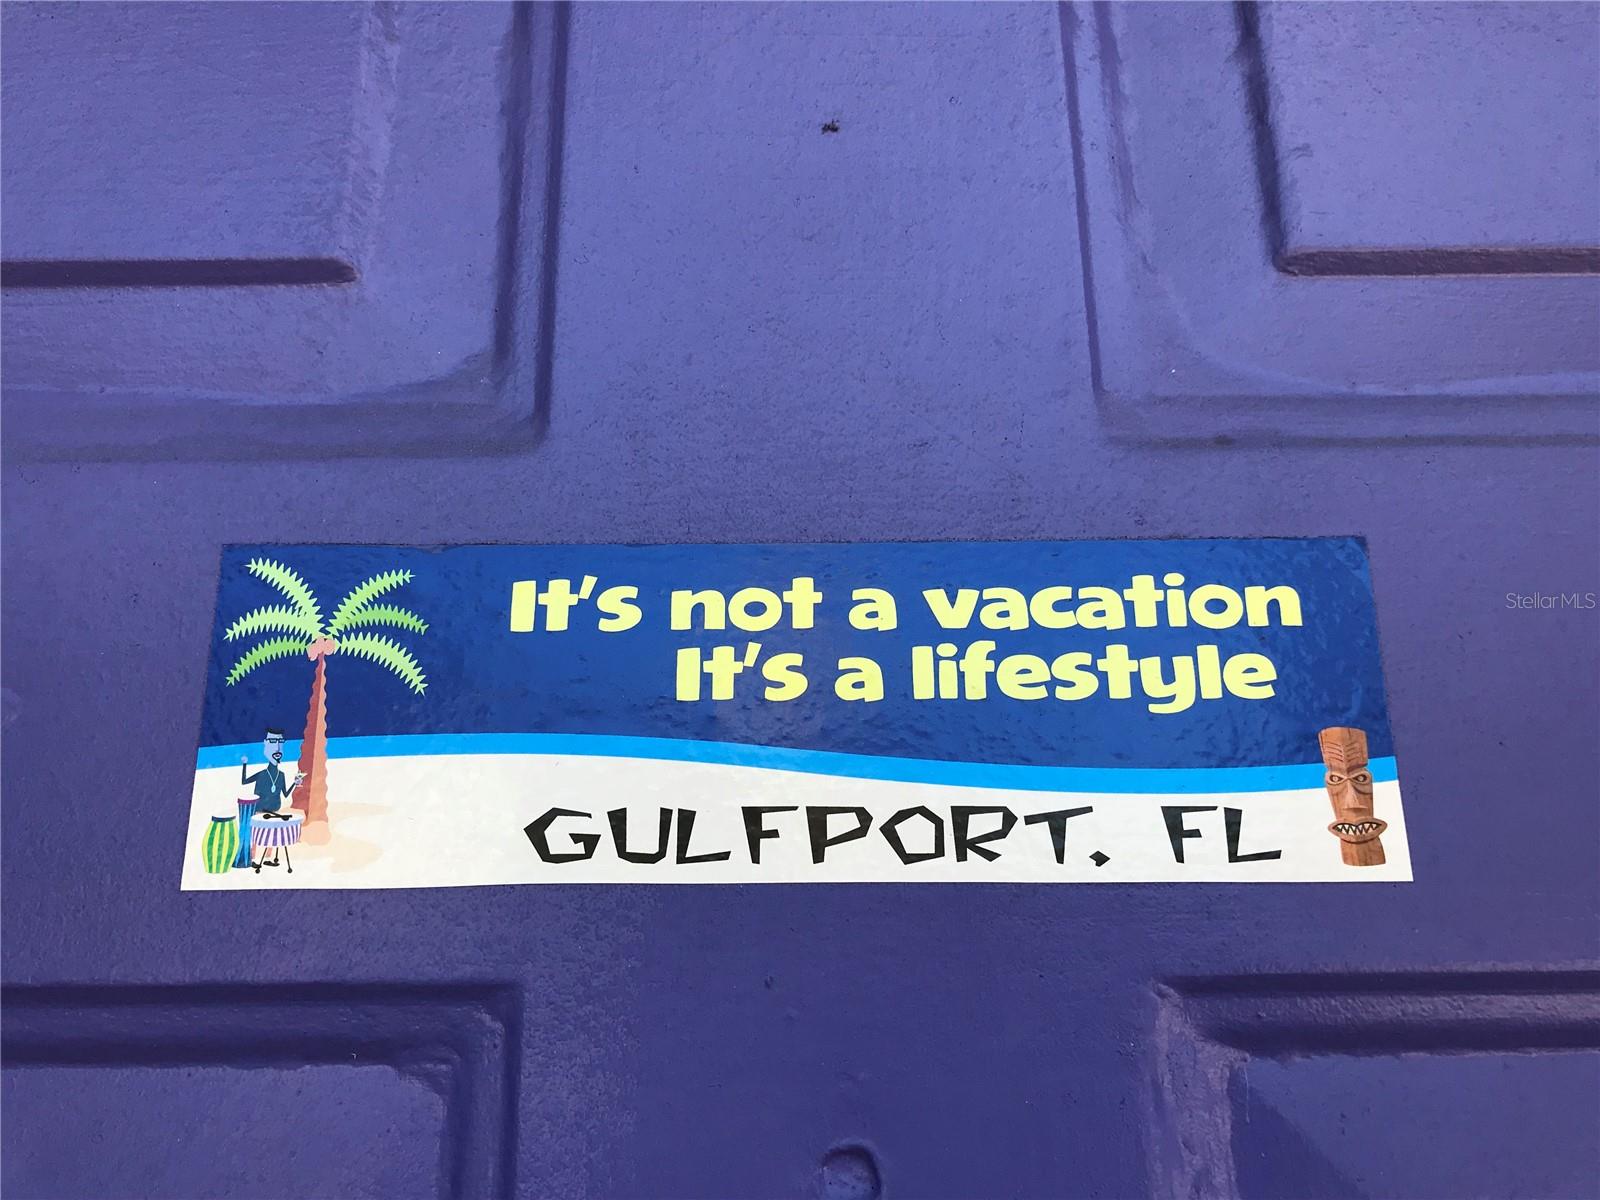 Live the Gulfport lifestyle 365 days of the year!